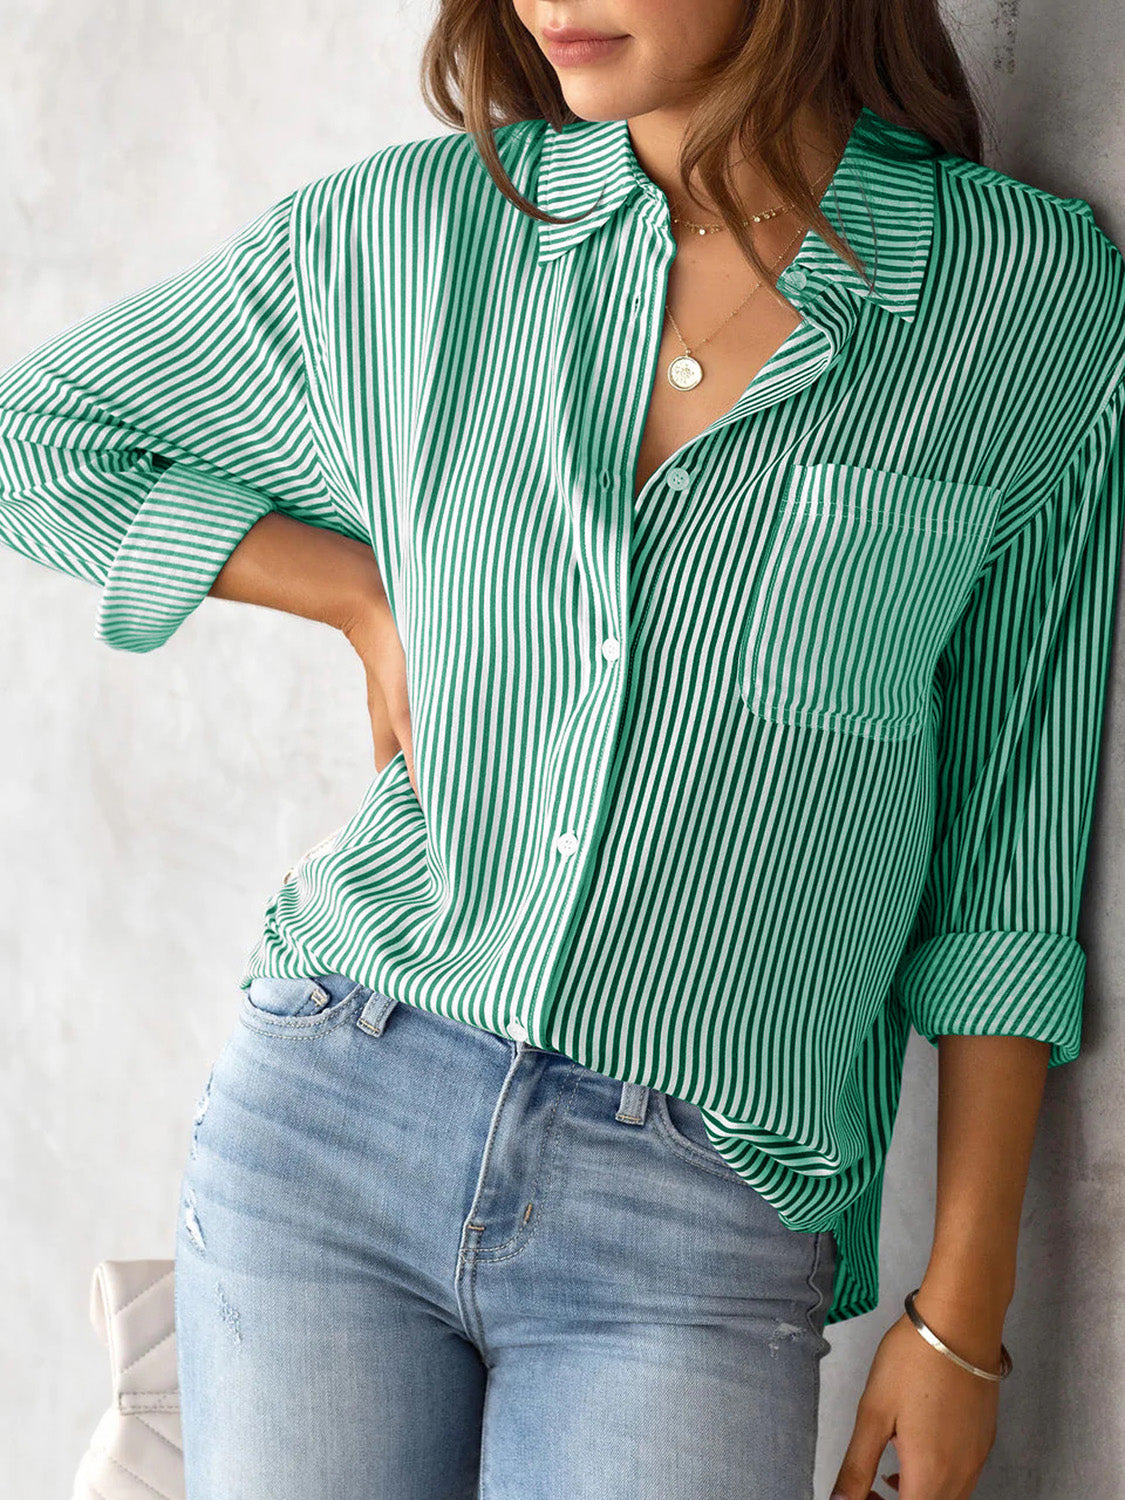 Striped Collared Neck Shirt with Pocket Casual Chic Boutique